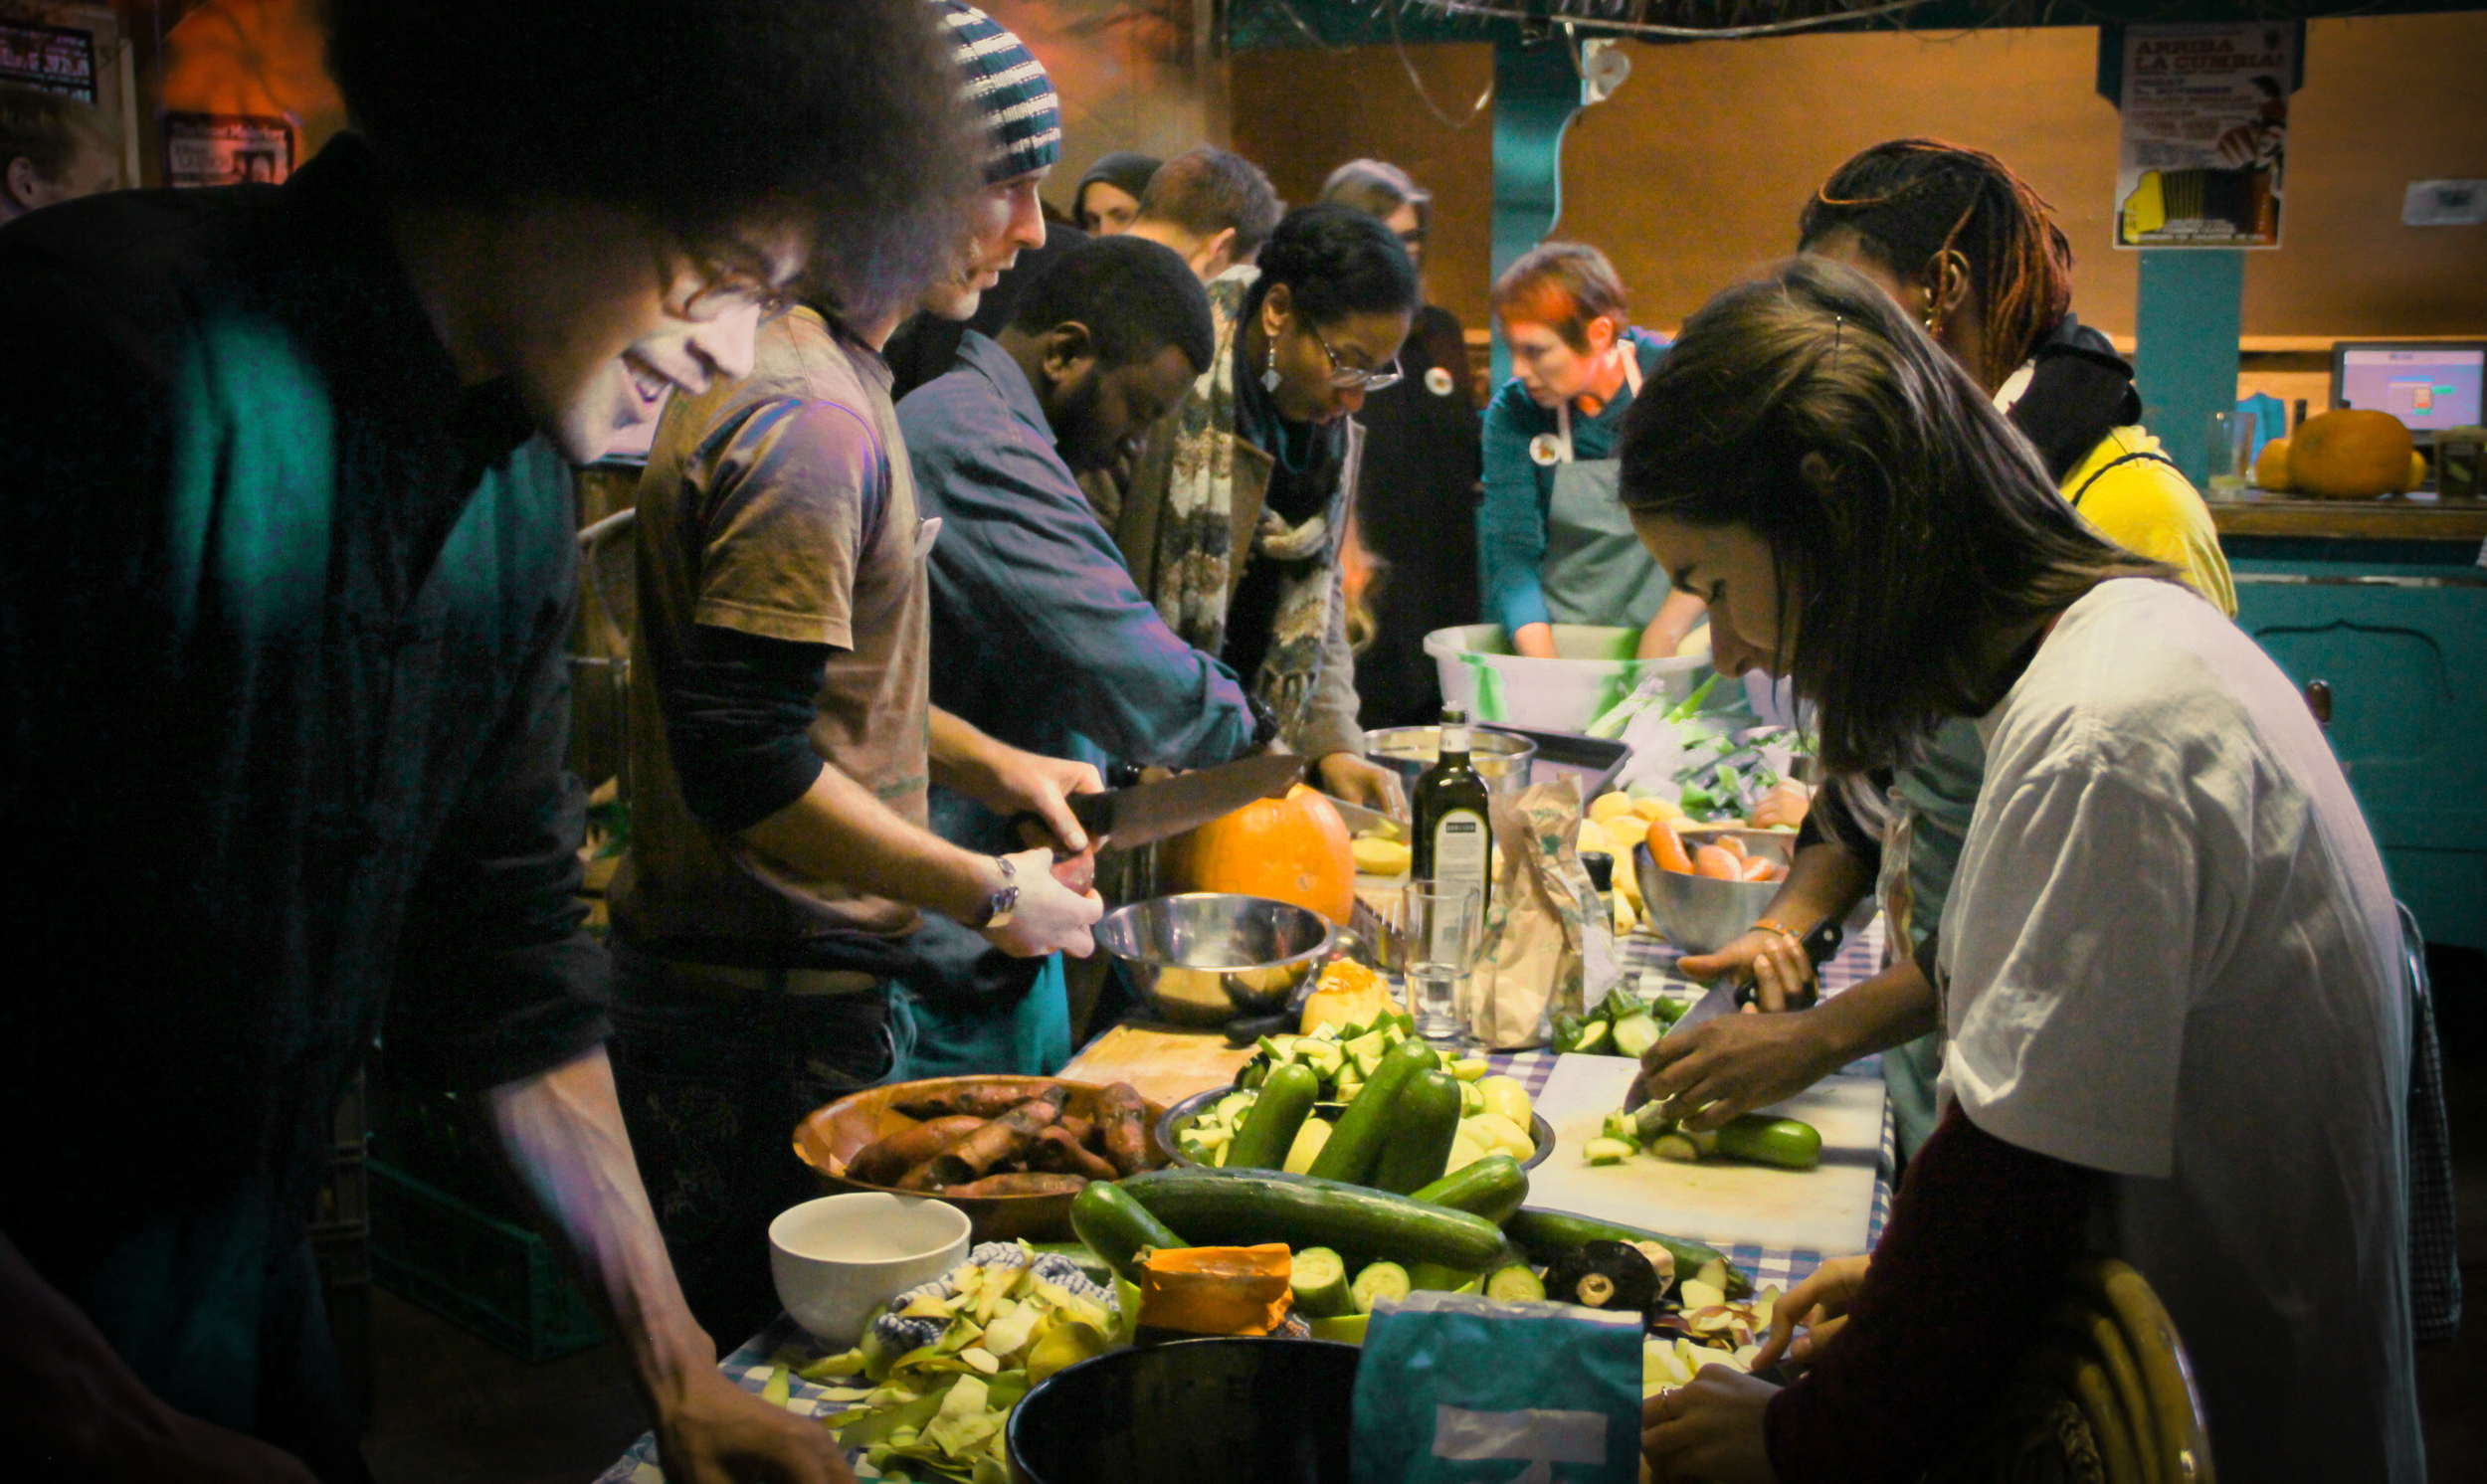 Food being prepared by a large group of people